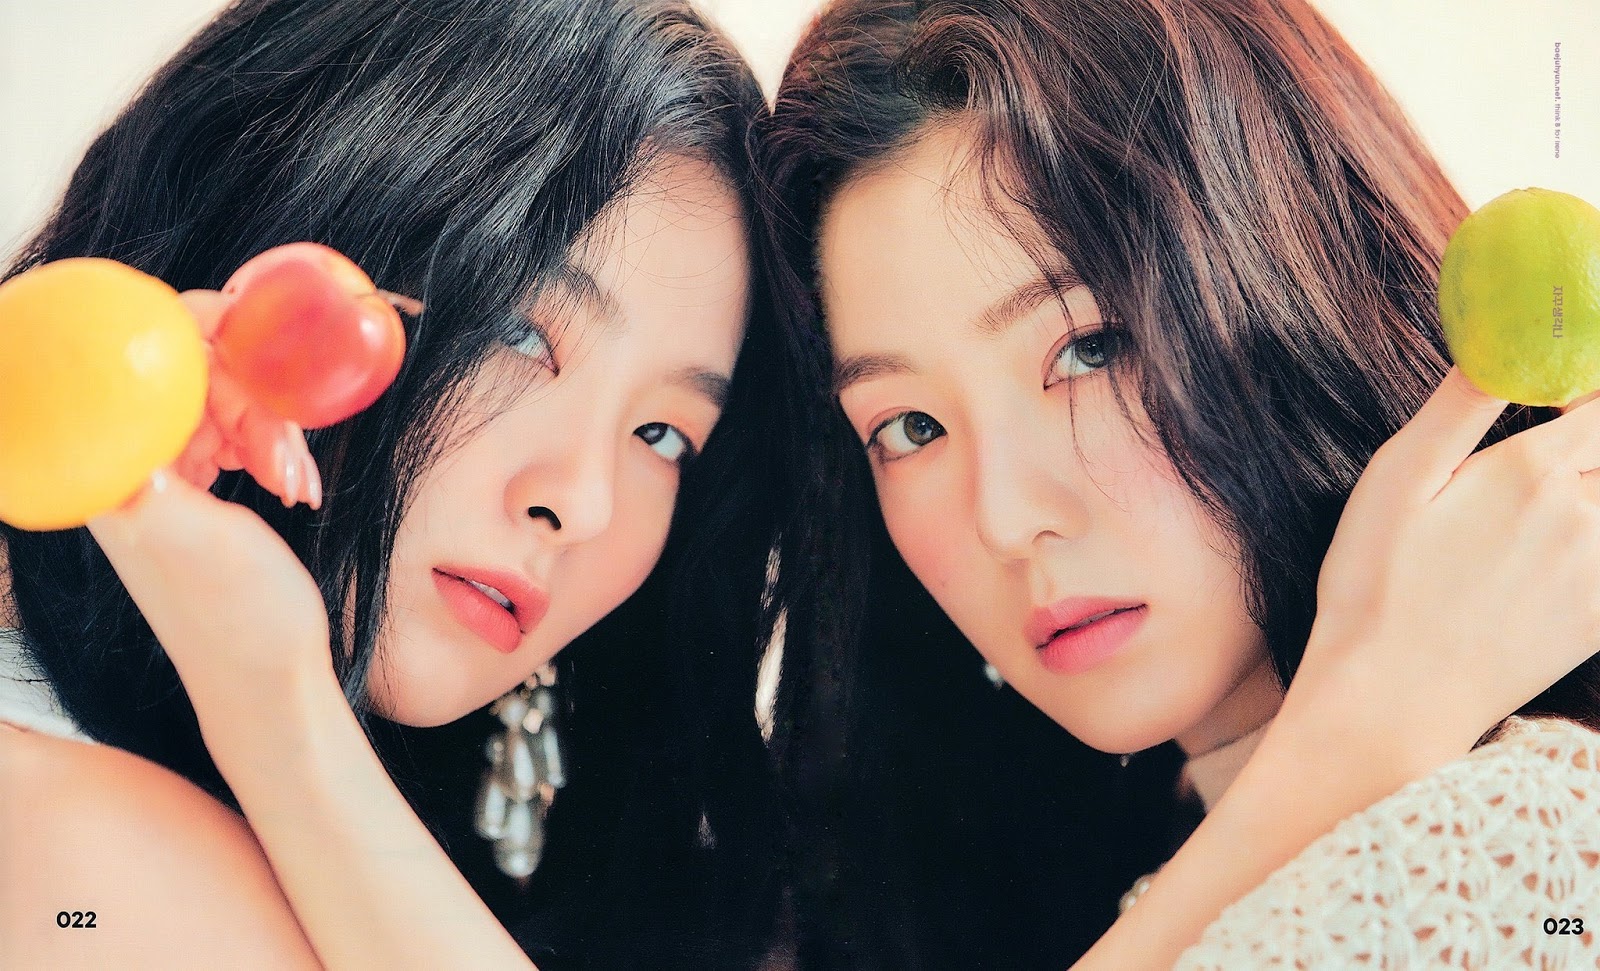 10+ Tweets That Show How Excited Reveluvs Are For The Debut Of Red Velvet’s #SeulRene Sub-Unit